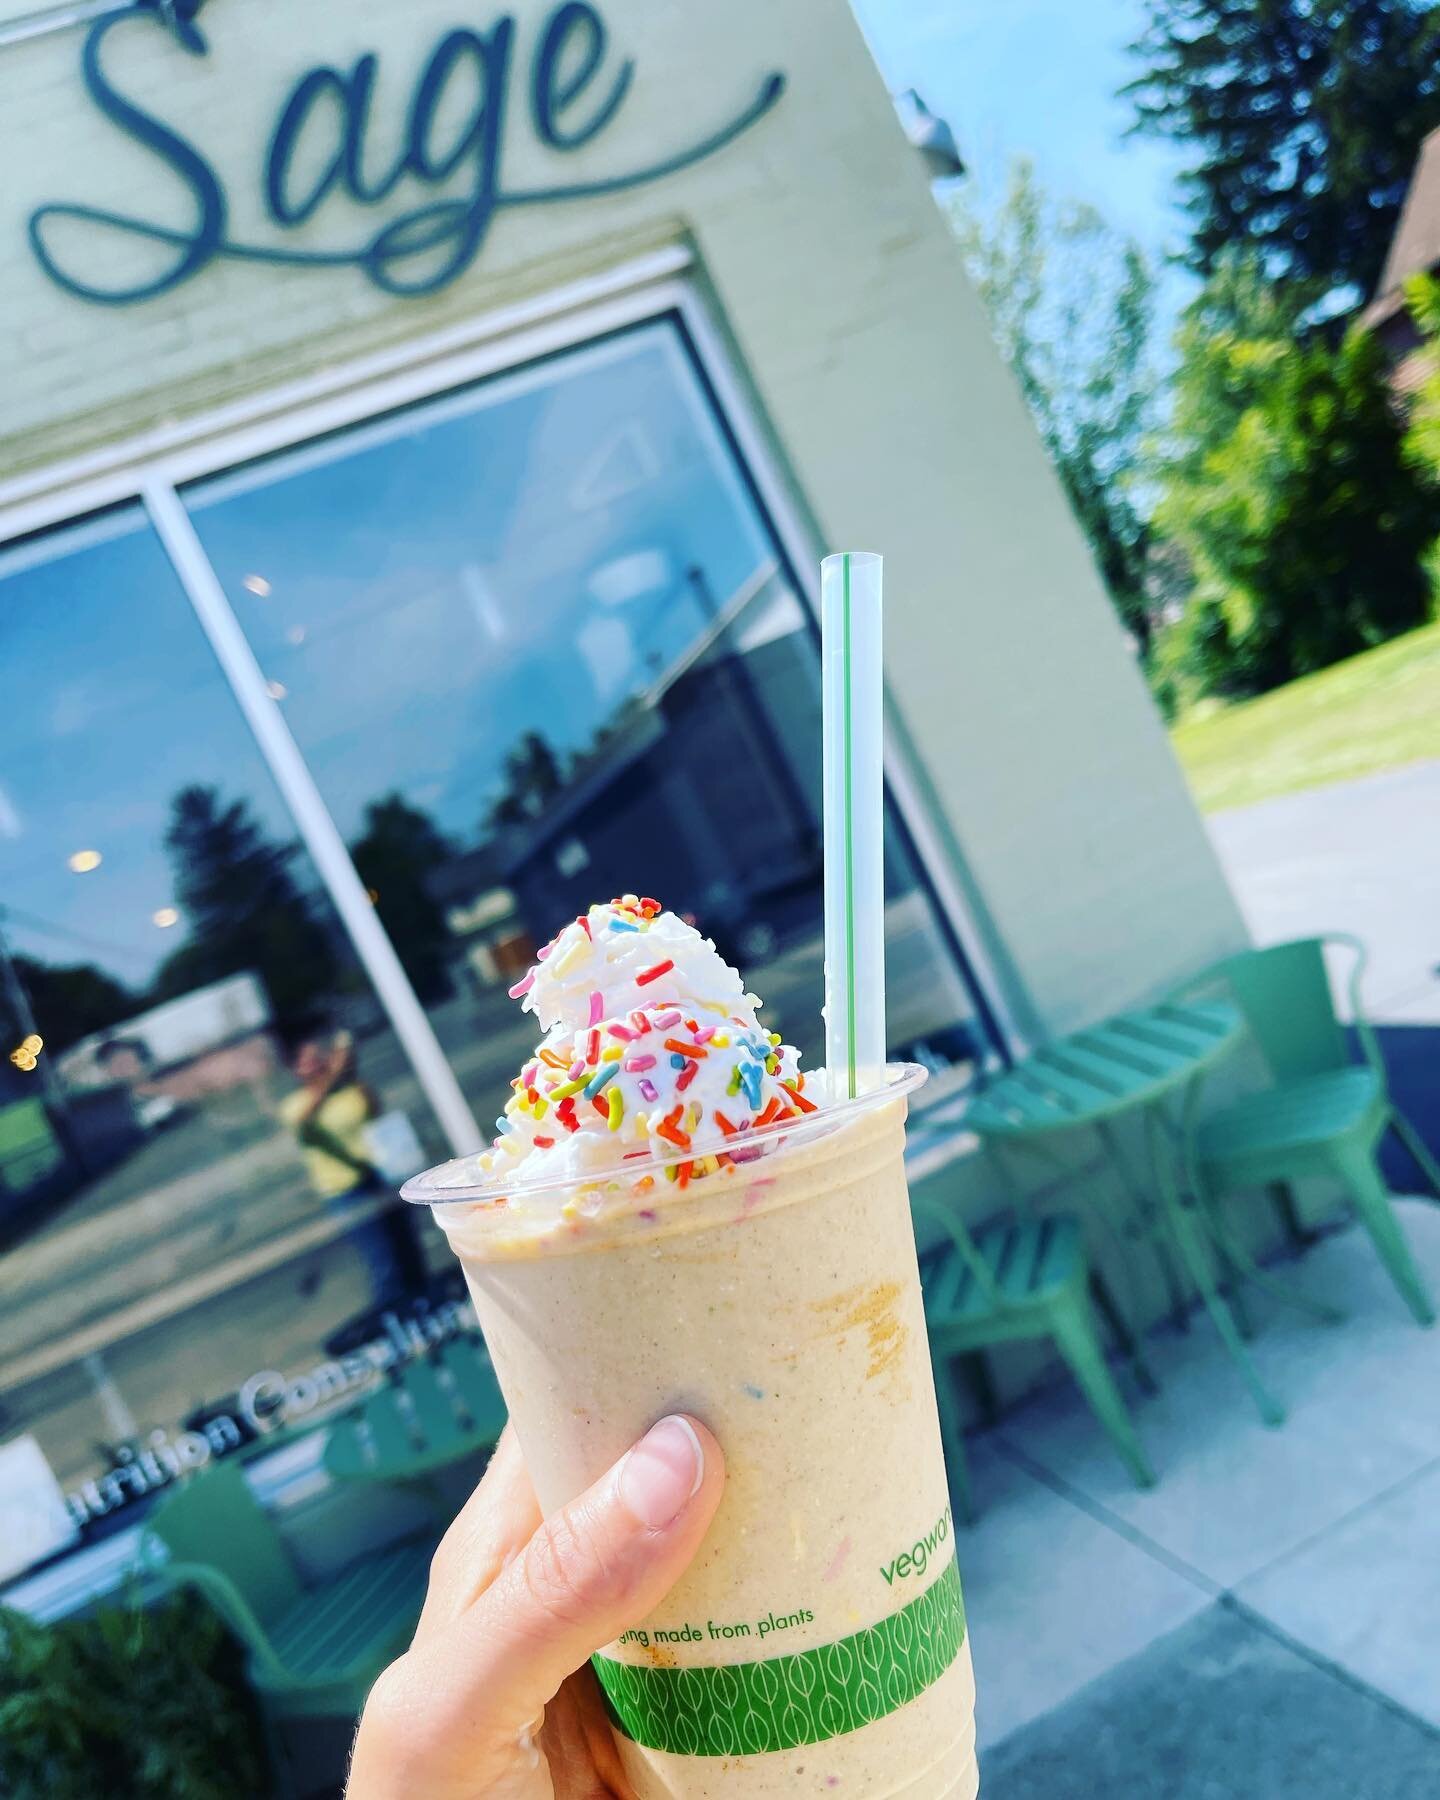 🥳It&rsquo;s our birthday month, we are celebrating with our Birthday Cake Smoothie🎂 It has gluten free oats, zucchini, almond butter, @sproutliving vanilla lucuma protein powder and banana🍌topped with coconut whip cream and vegan all natural sprin